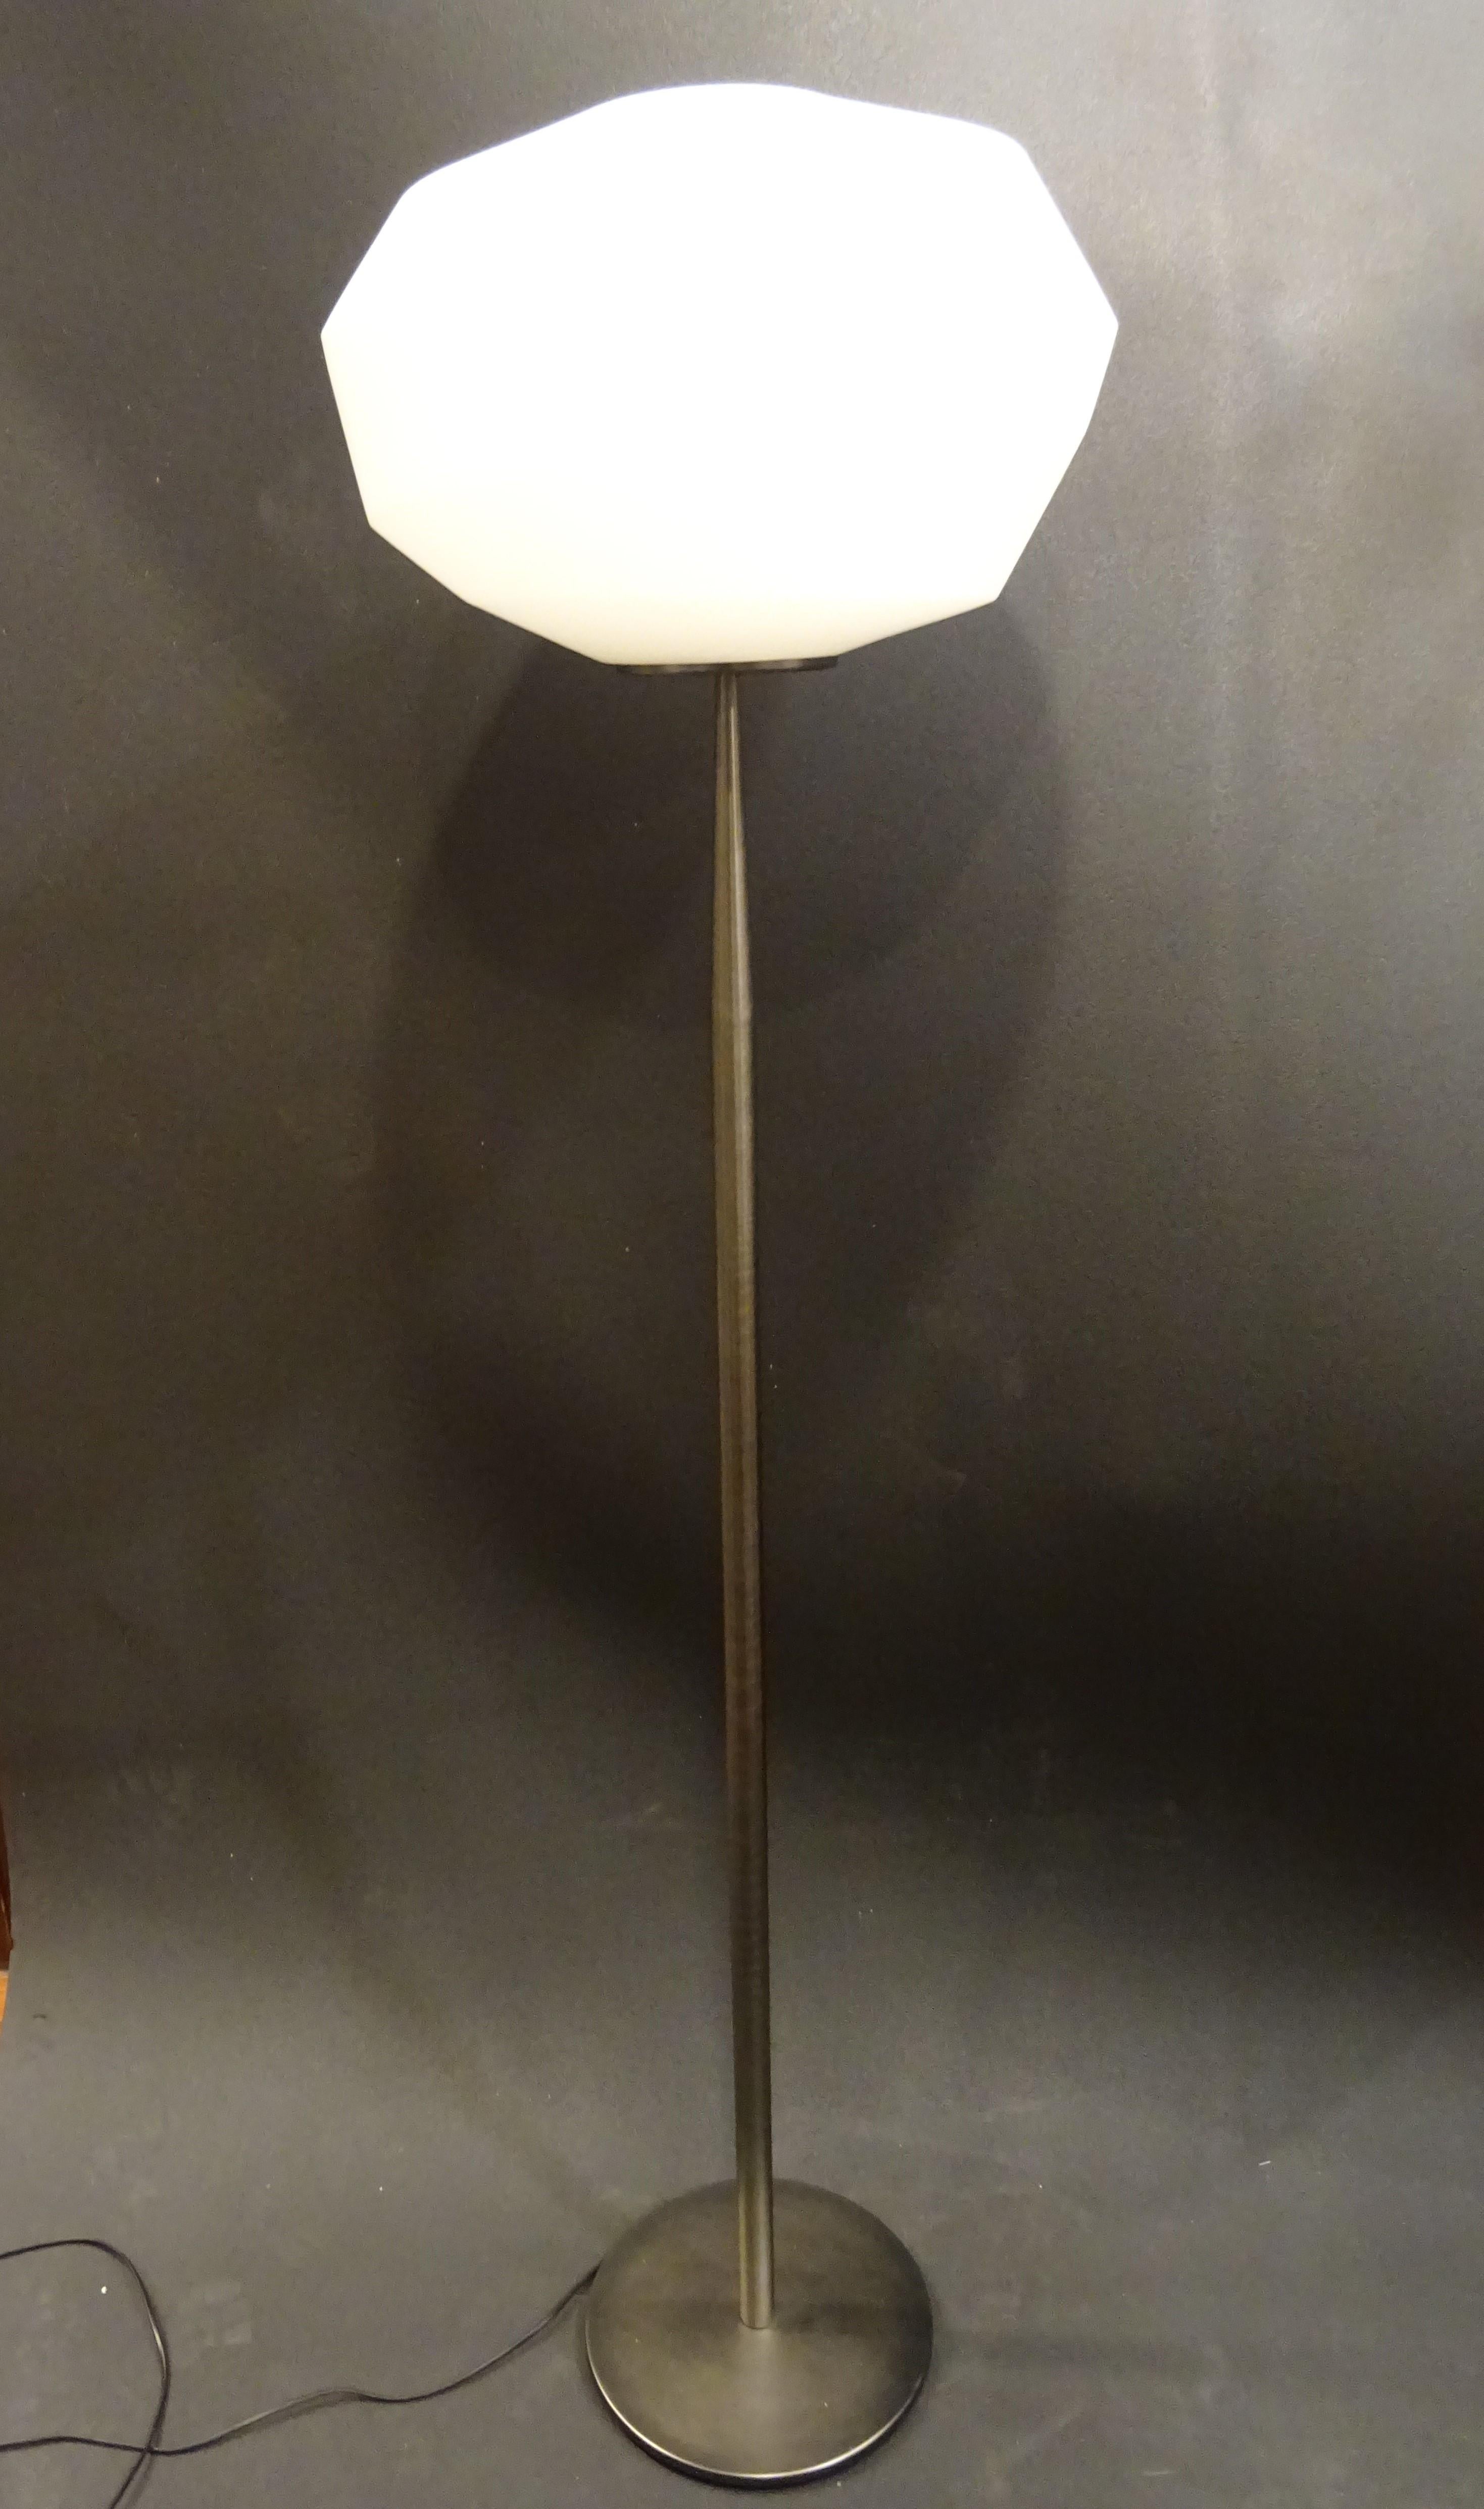 Natuzzi Italian Blown Glass in Mat White and Polished Steel Floor Lamp For Sale 3